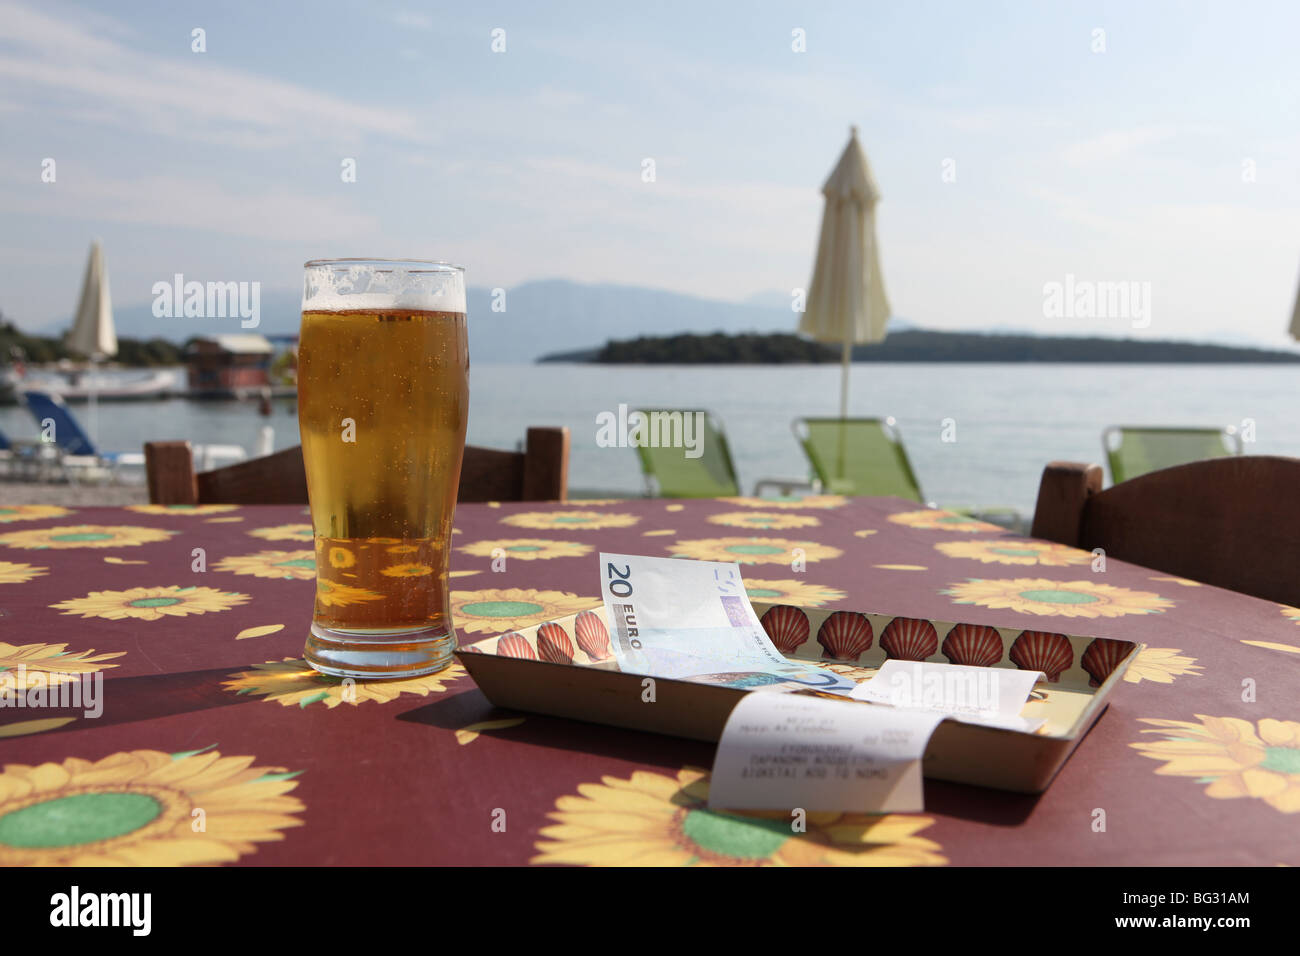 Restaurant on the beach, receipt on a tray with a bank note payment. Refreshing glass of beer. Stock Photo